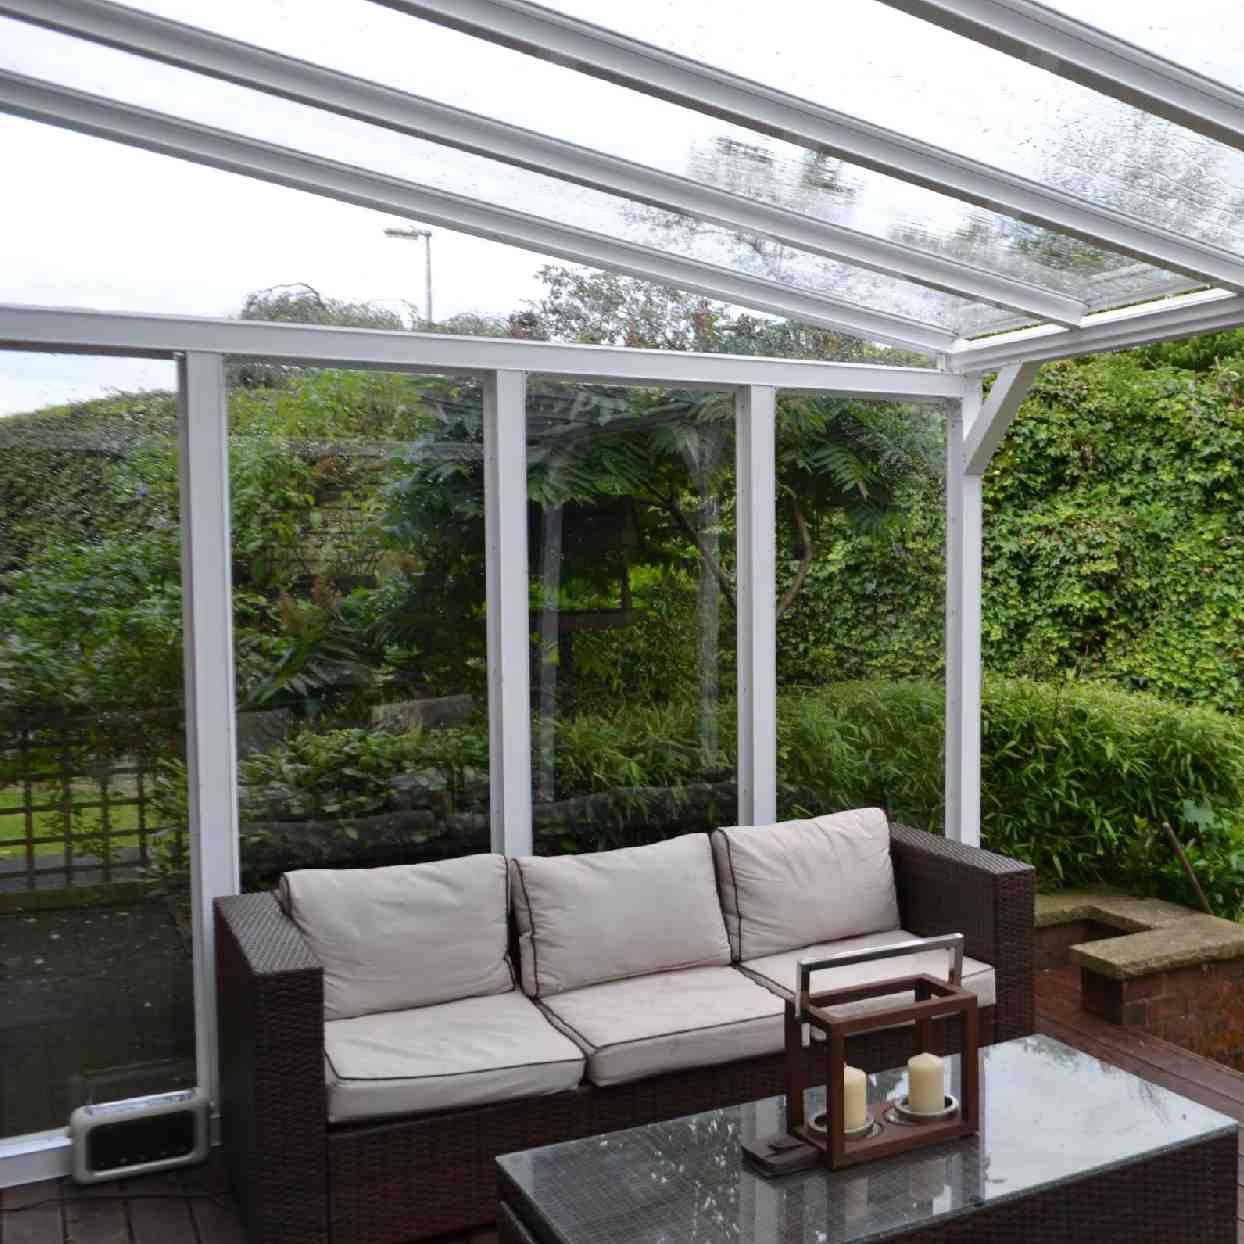 Buy Omega Verandah White with 16mm Polycarbonate Glazing - 3.1m (W) x 3.0m (P), (2) Supporting Posts online today